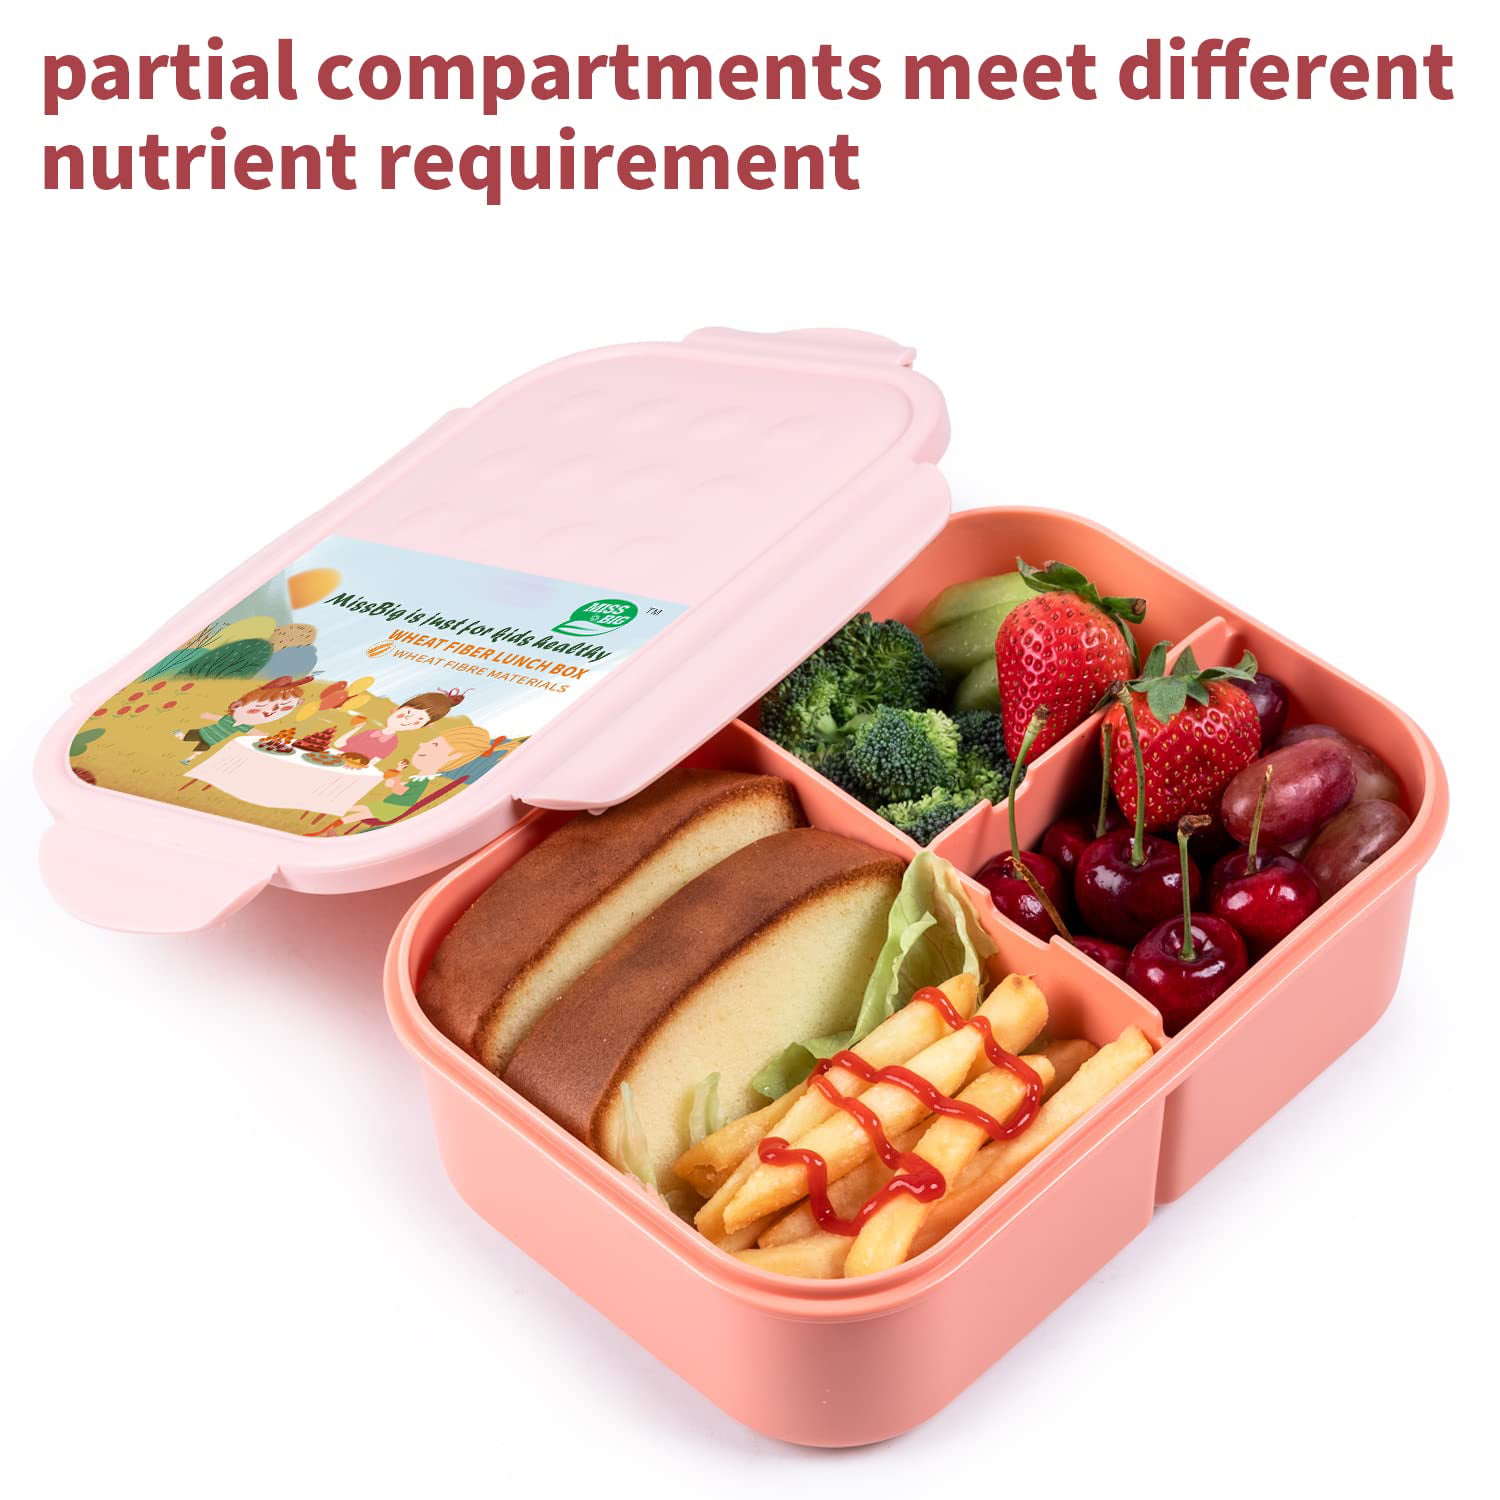 MISS BIG Bento Box, Lunch Box Kids,Ideal Leak Proof Lunch Box Containers,  Mom’s Choice Kids Lunch Box, No BPAs and No Chemical Dyes Bento Box for